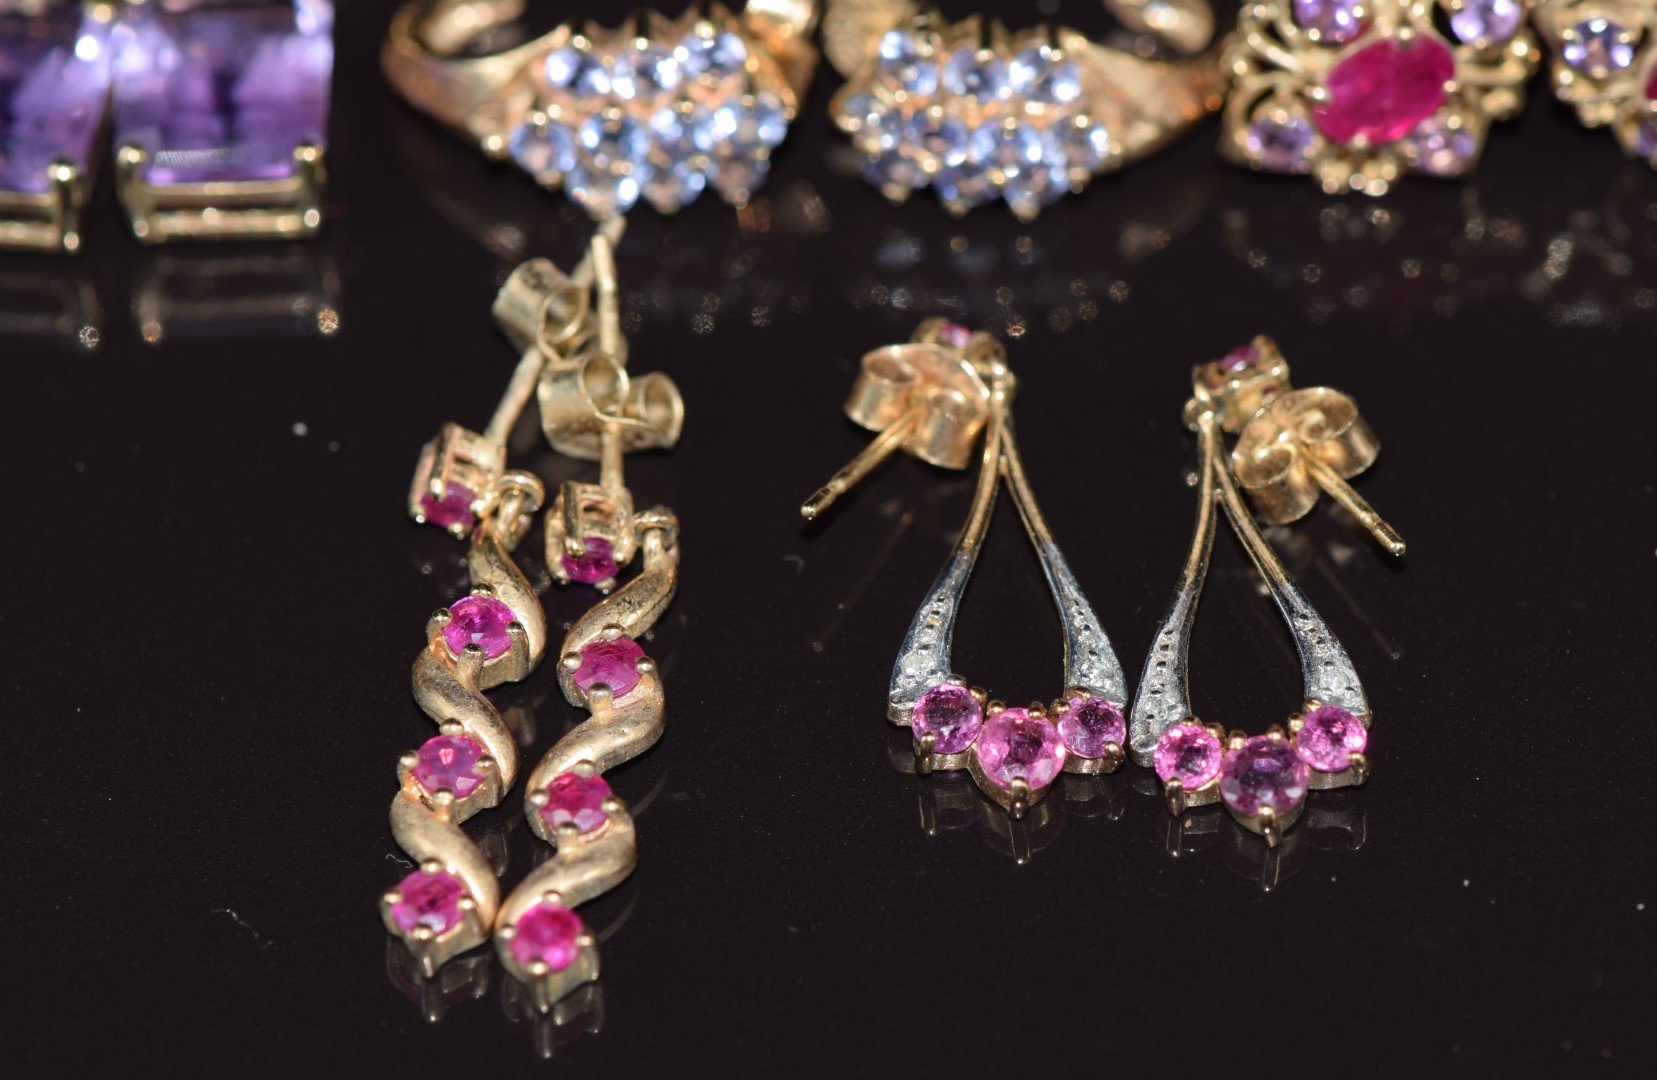 Five pairs of 9ct gold earrings set with amethysts, rubies, and tanzanites, 12.3g - Image 4 of 5